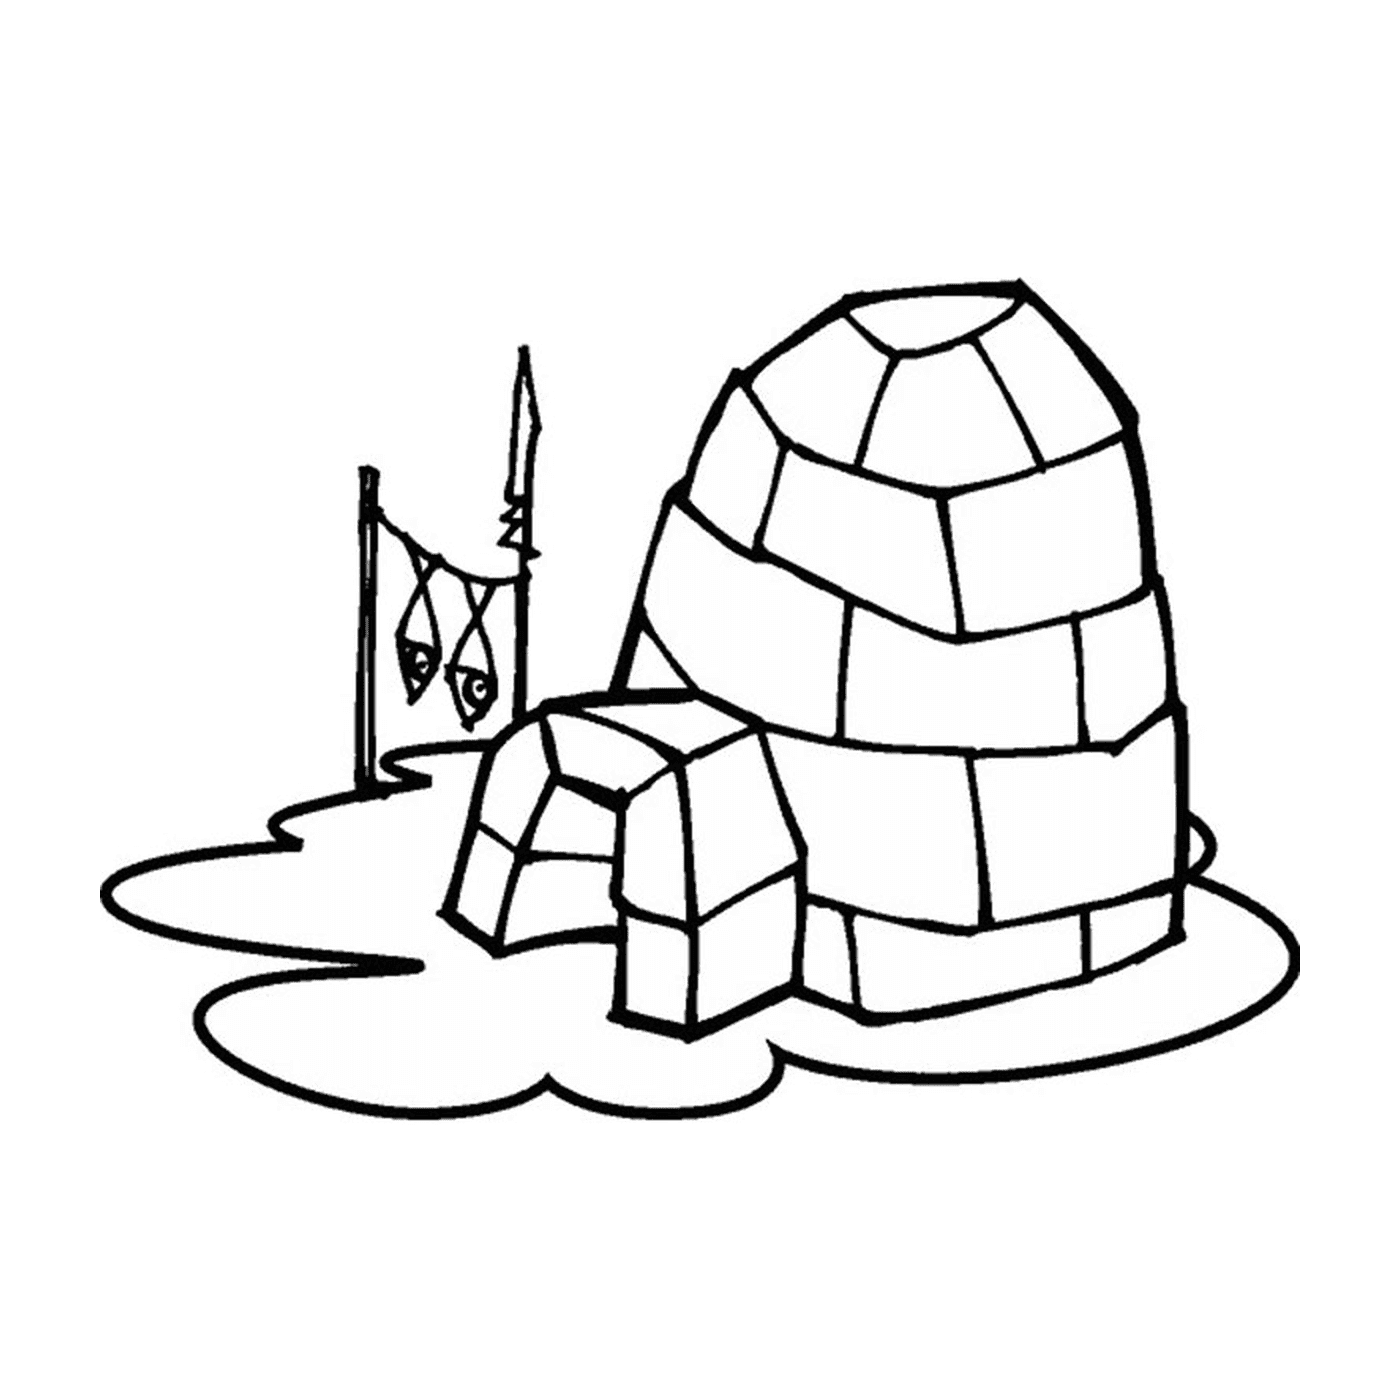  Illustration of igloo and dried fish 